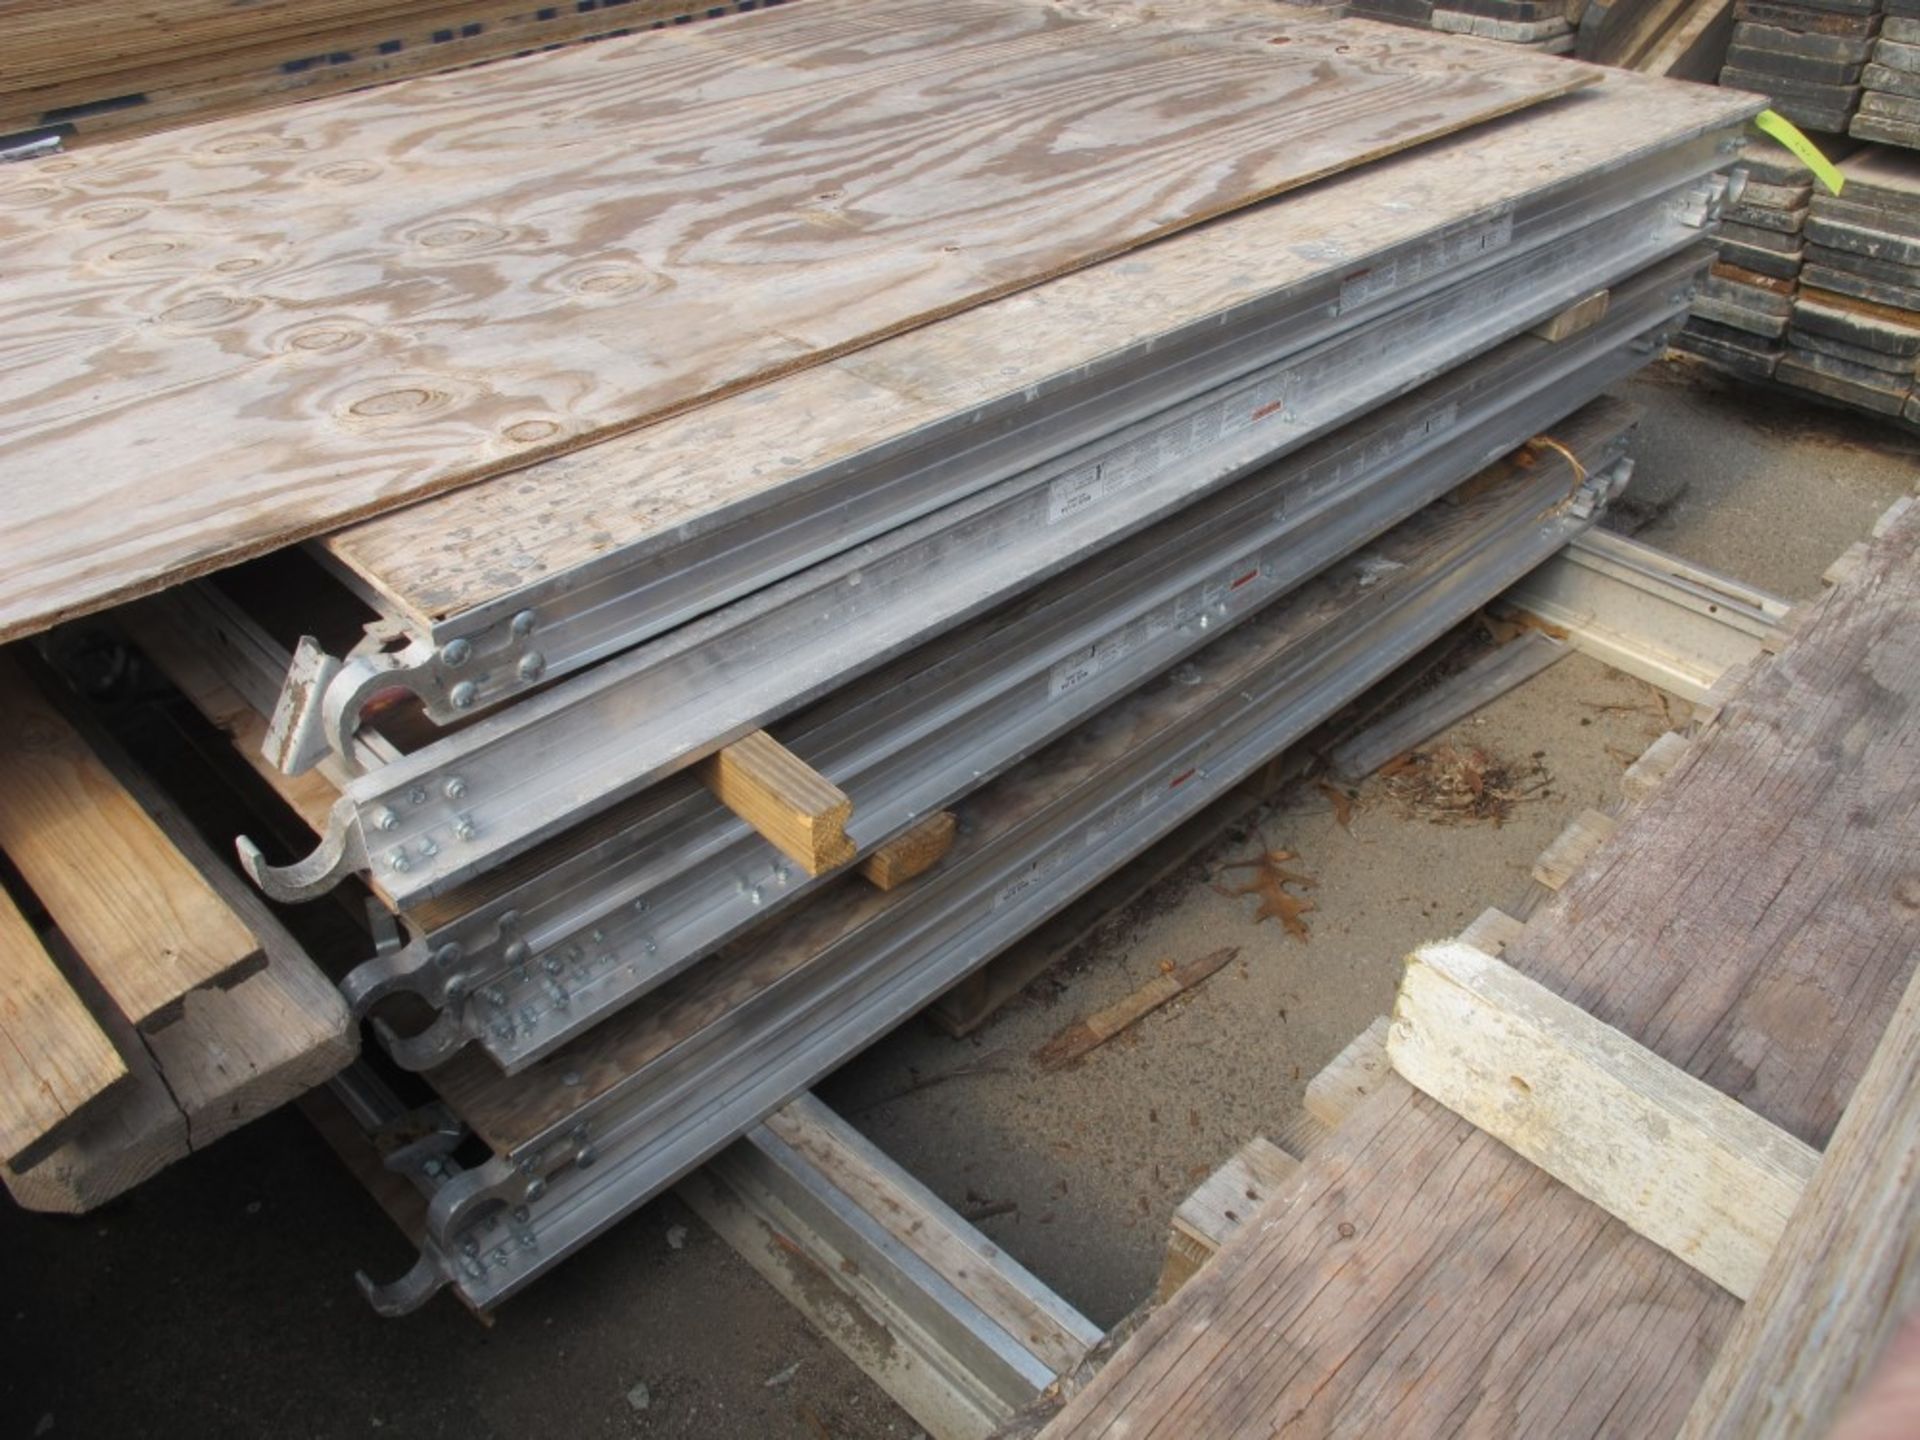 Lot Including: (6) Alum/Plydeck 28" x 7' No Hatch (Waco #PAP7282 - Weight 294); (6) Alum/Ply Hatch